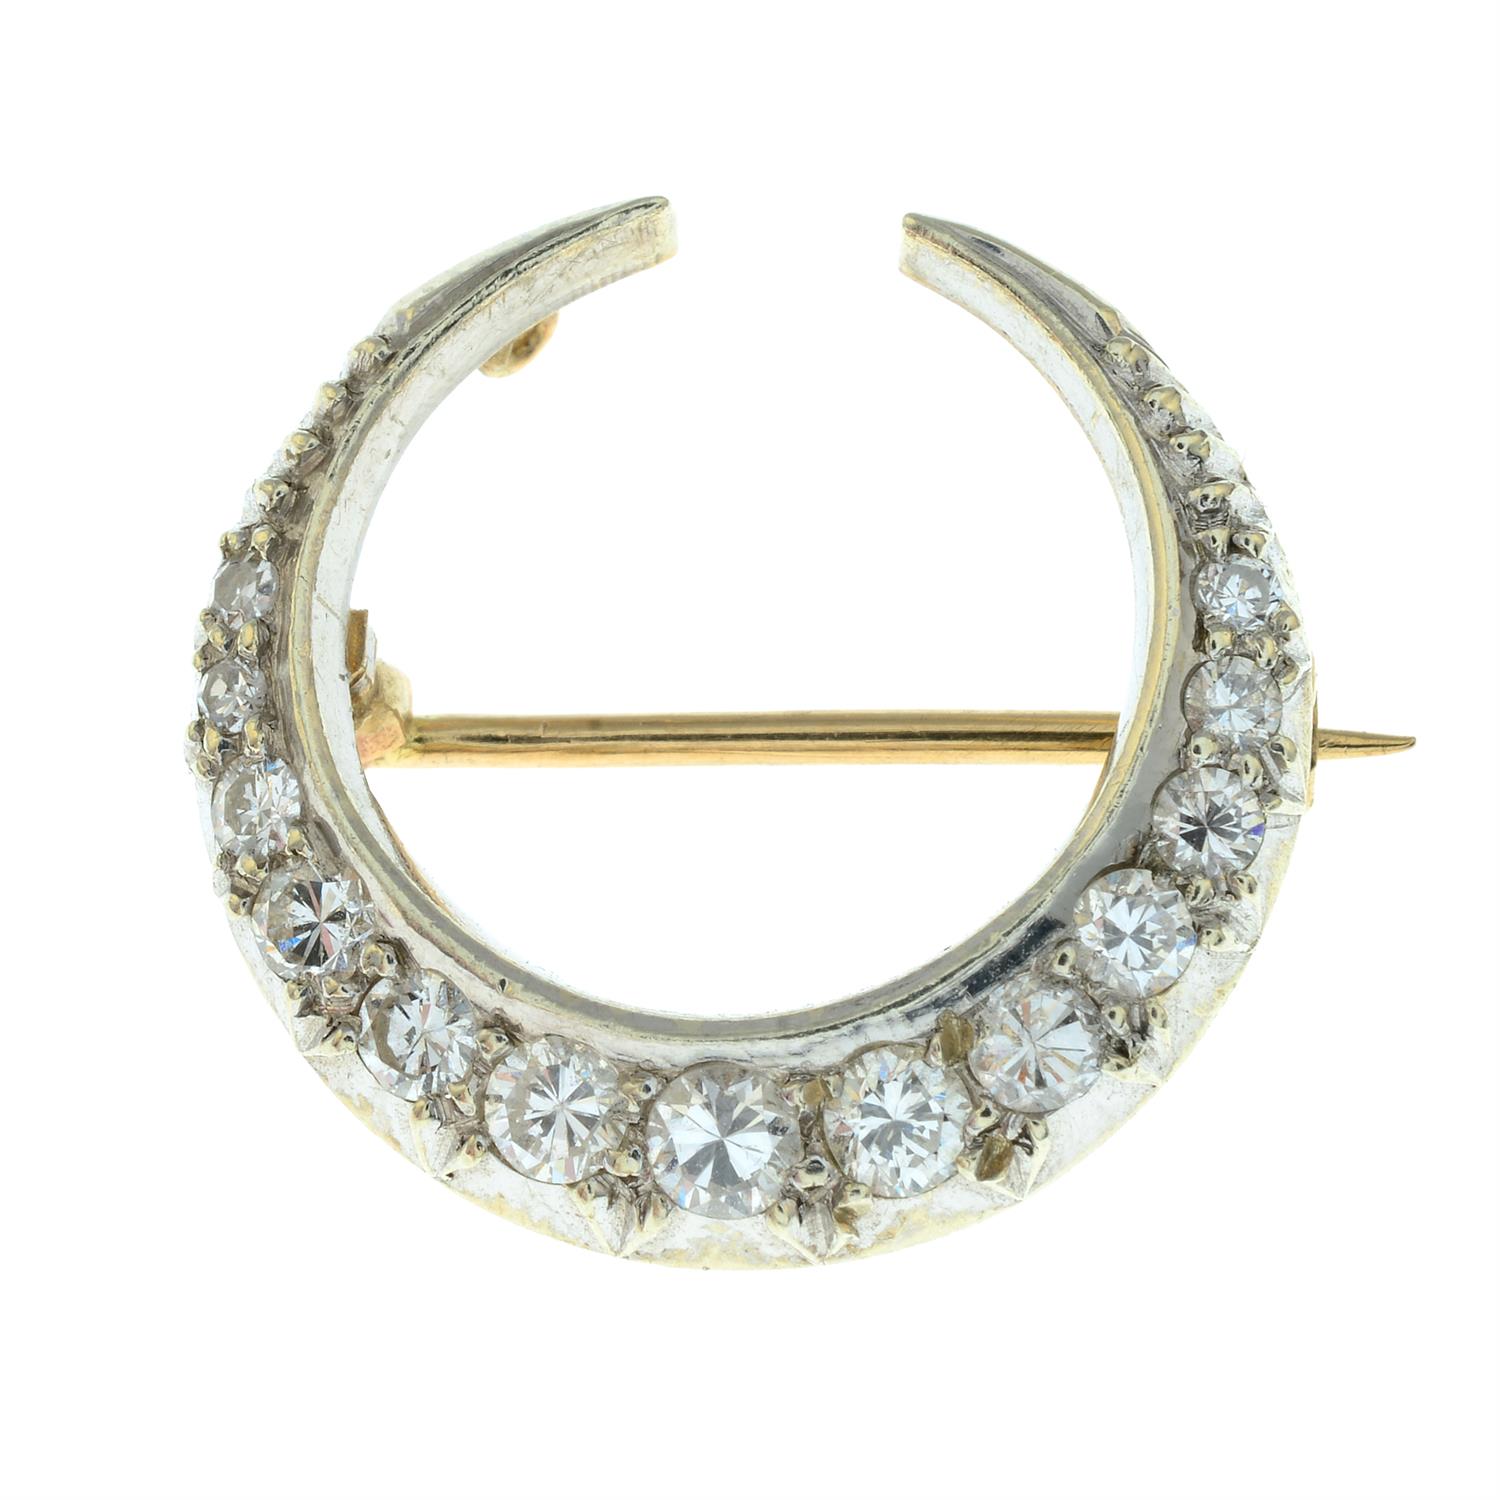 A brilliant and single-cut diamond crescent moon brooch. - Image 2 of 4